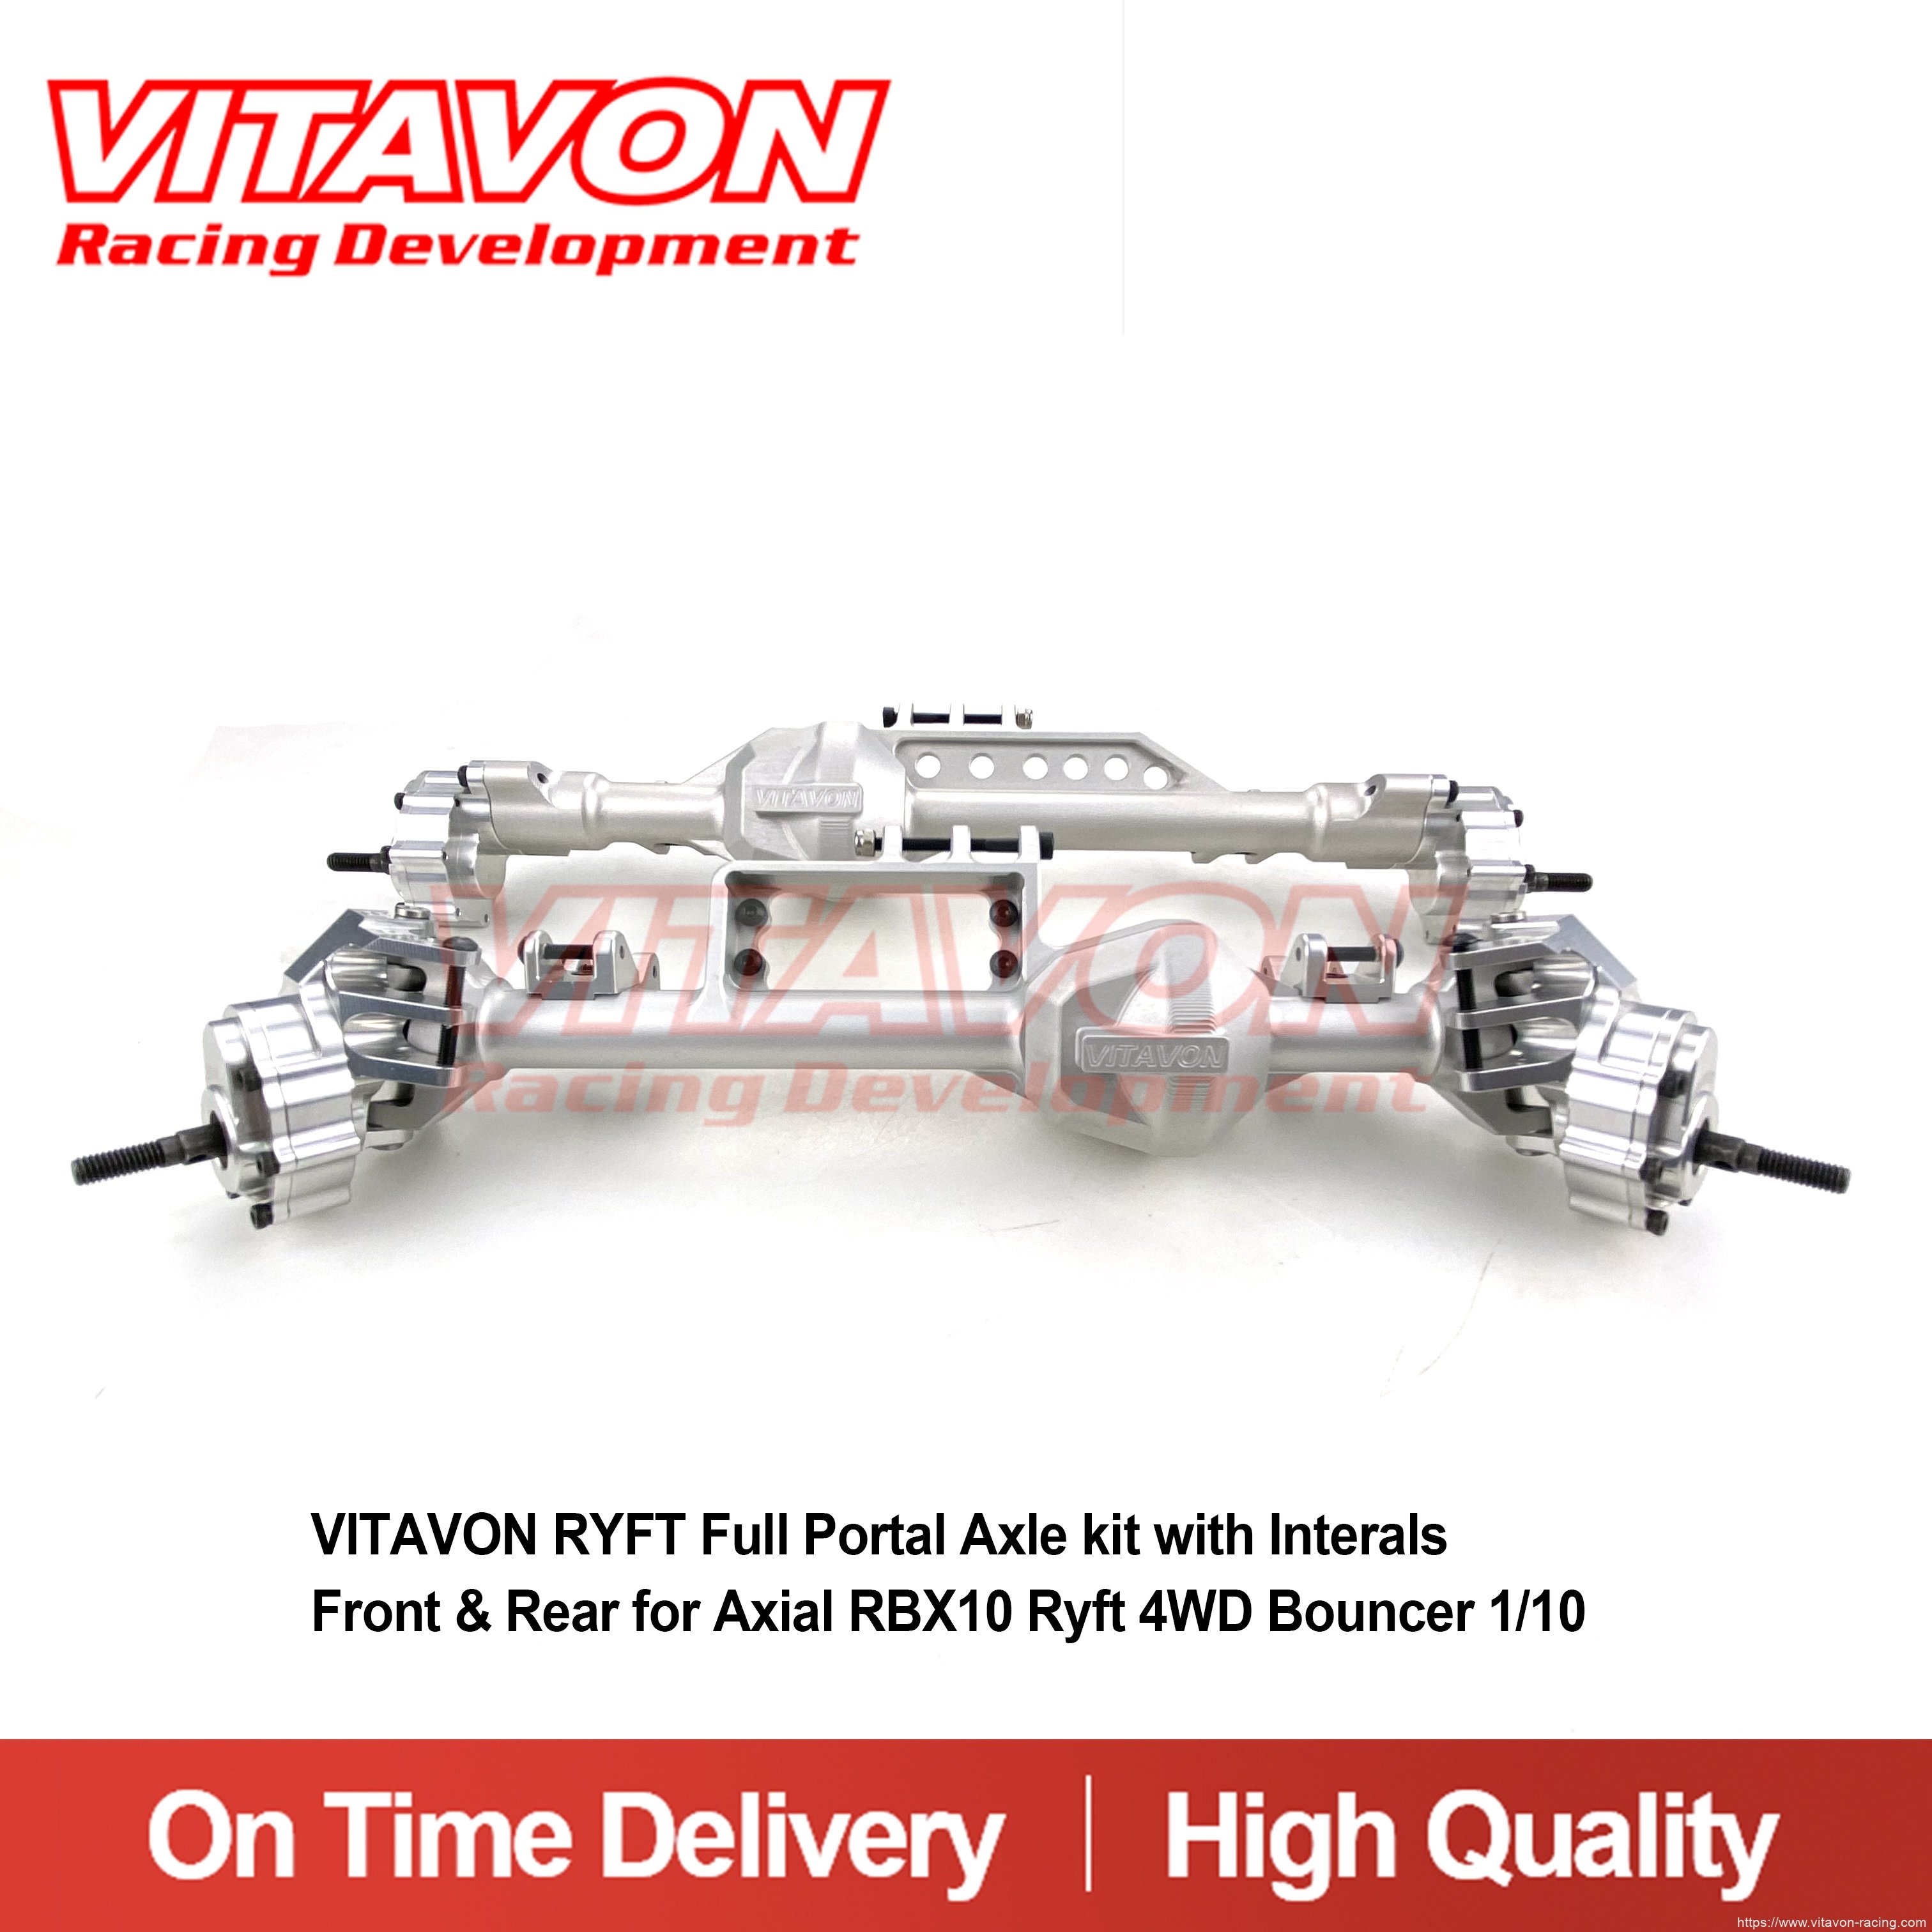 VITAVON RYFT Full Portal Axle kit with Interals Front & Rear for Axial RBX10 Ryft 4WD Bouncer 1/10